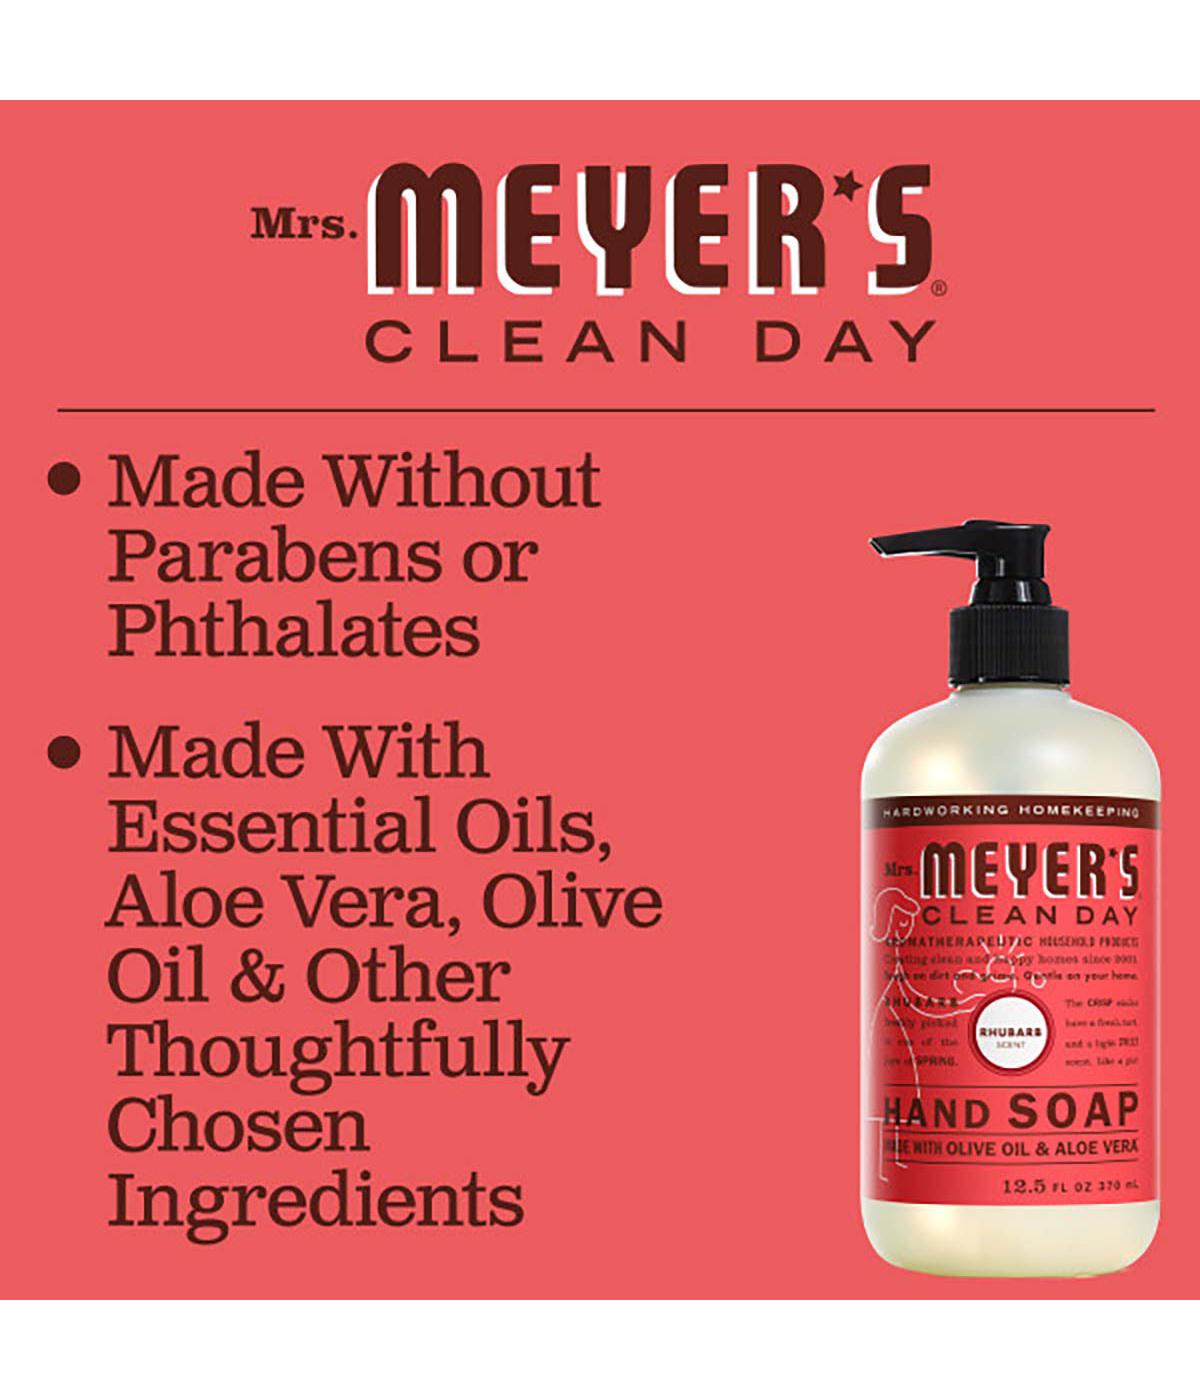 Mrs. Meyer's Clean Day Rhubarb Scent Liquid Hand Soap; image 4 of 5